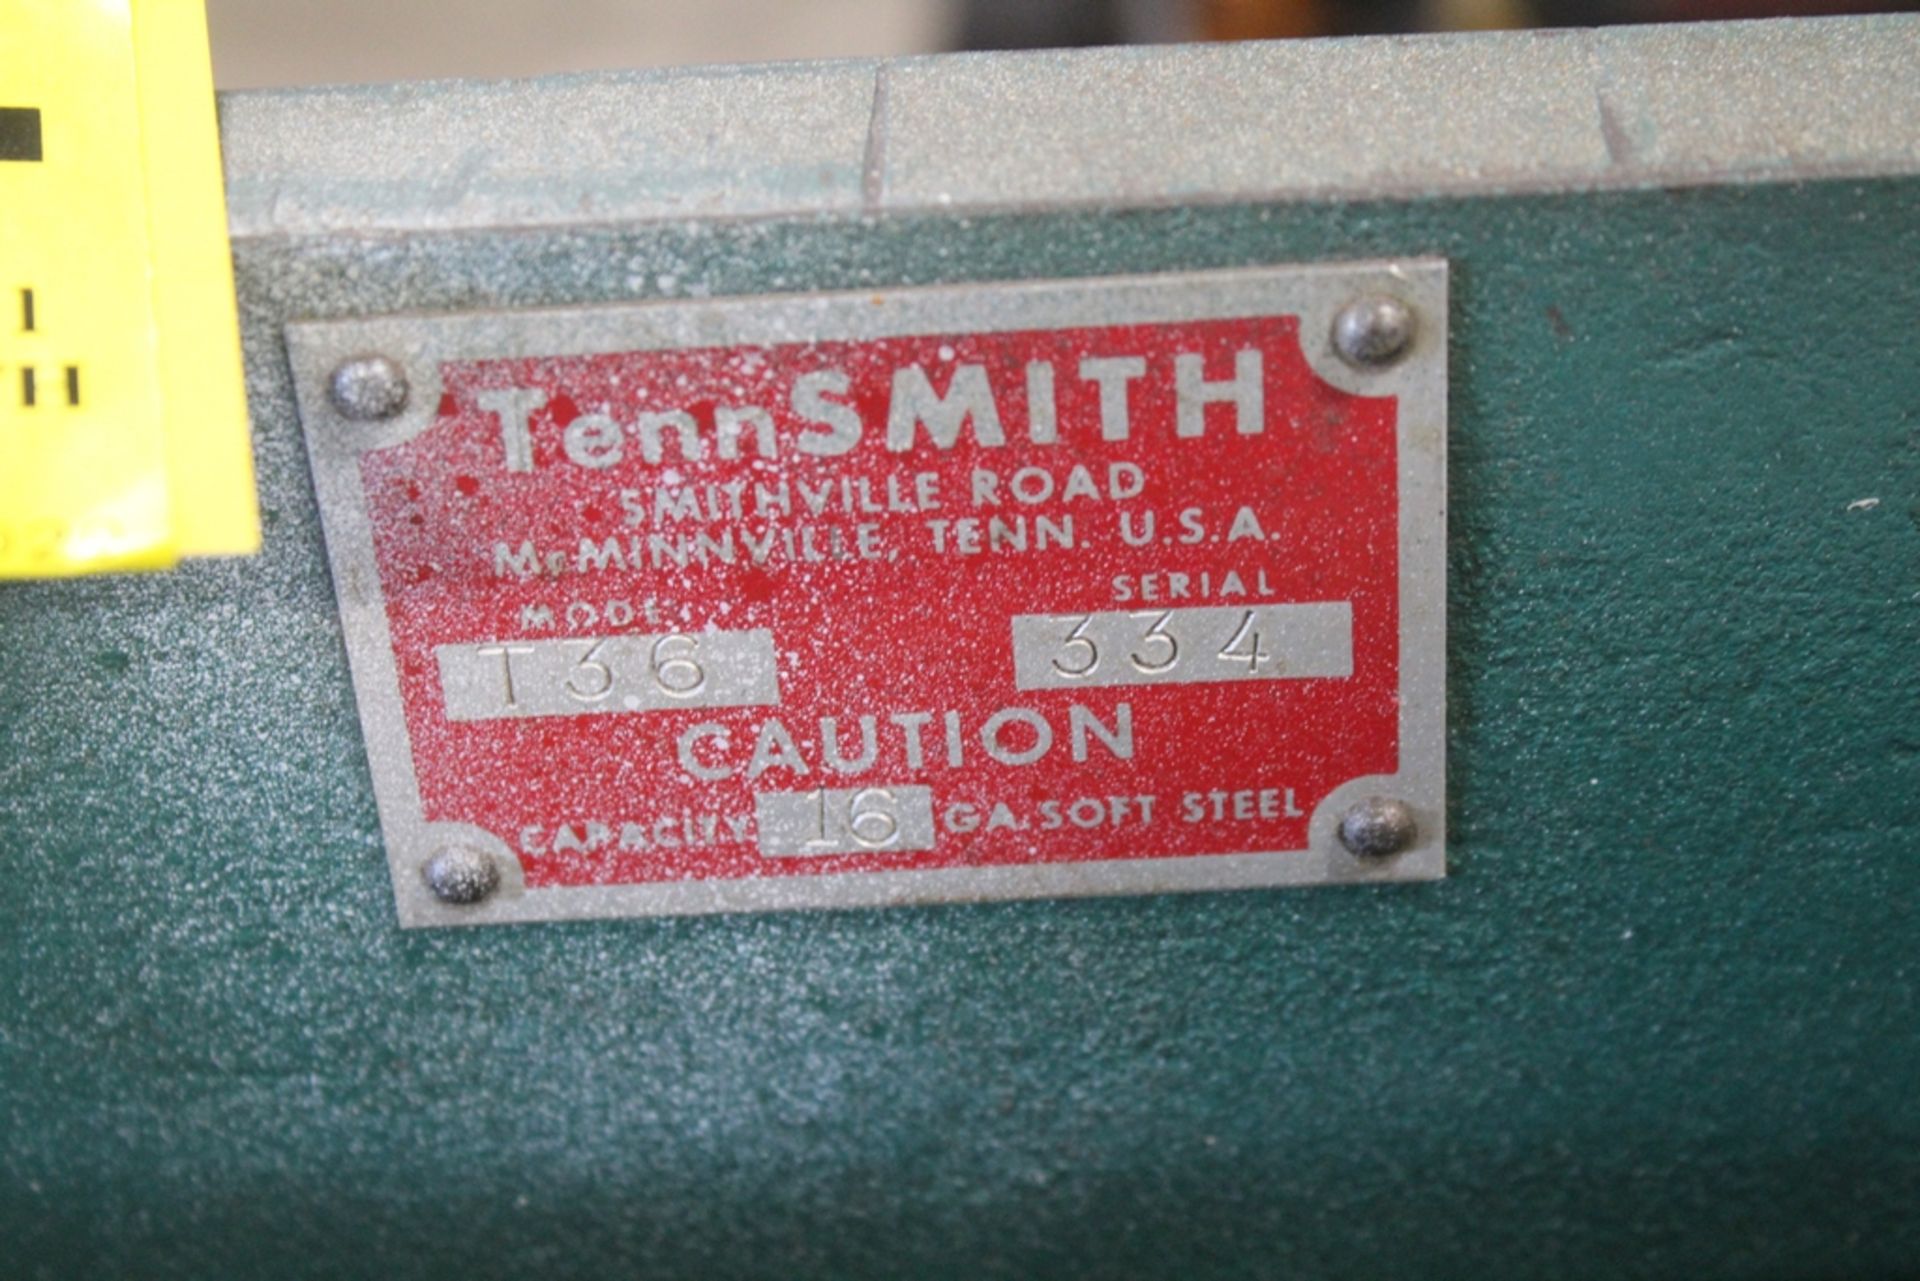 TENNSMITH 16 GAUGE X 36” MODEL 136 FOOT SHEAR, S/N 334 WITH MANUAL BACKGAUGE & (2) FRONT SUPPORTS - Image 2 of 3